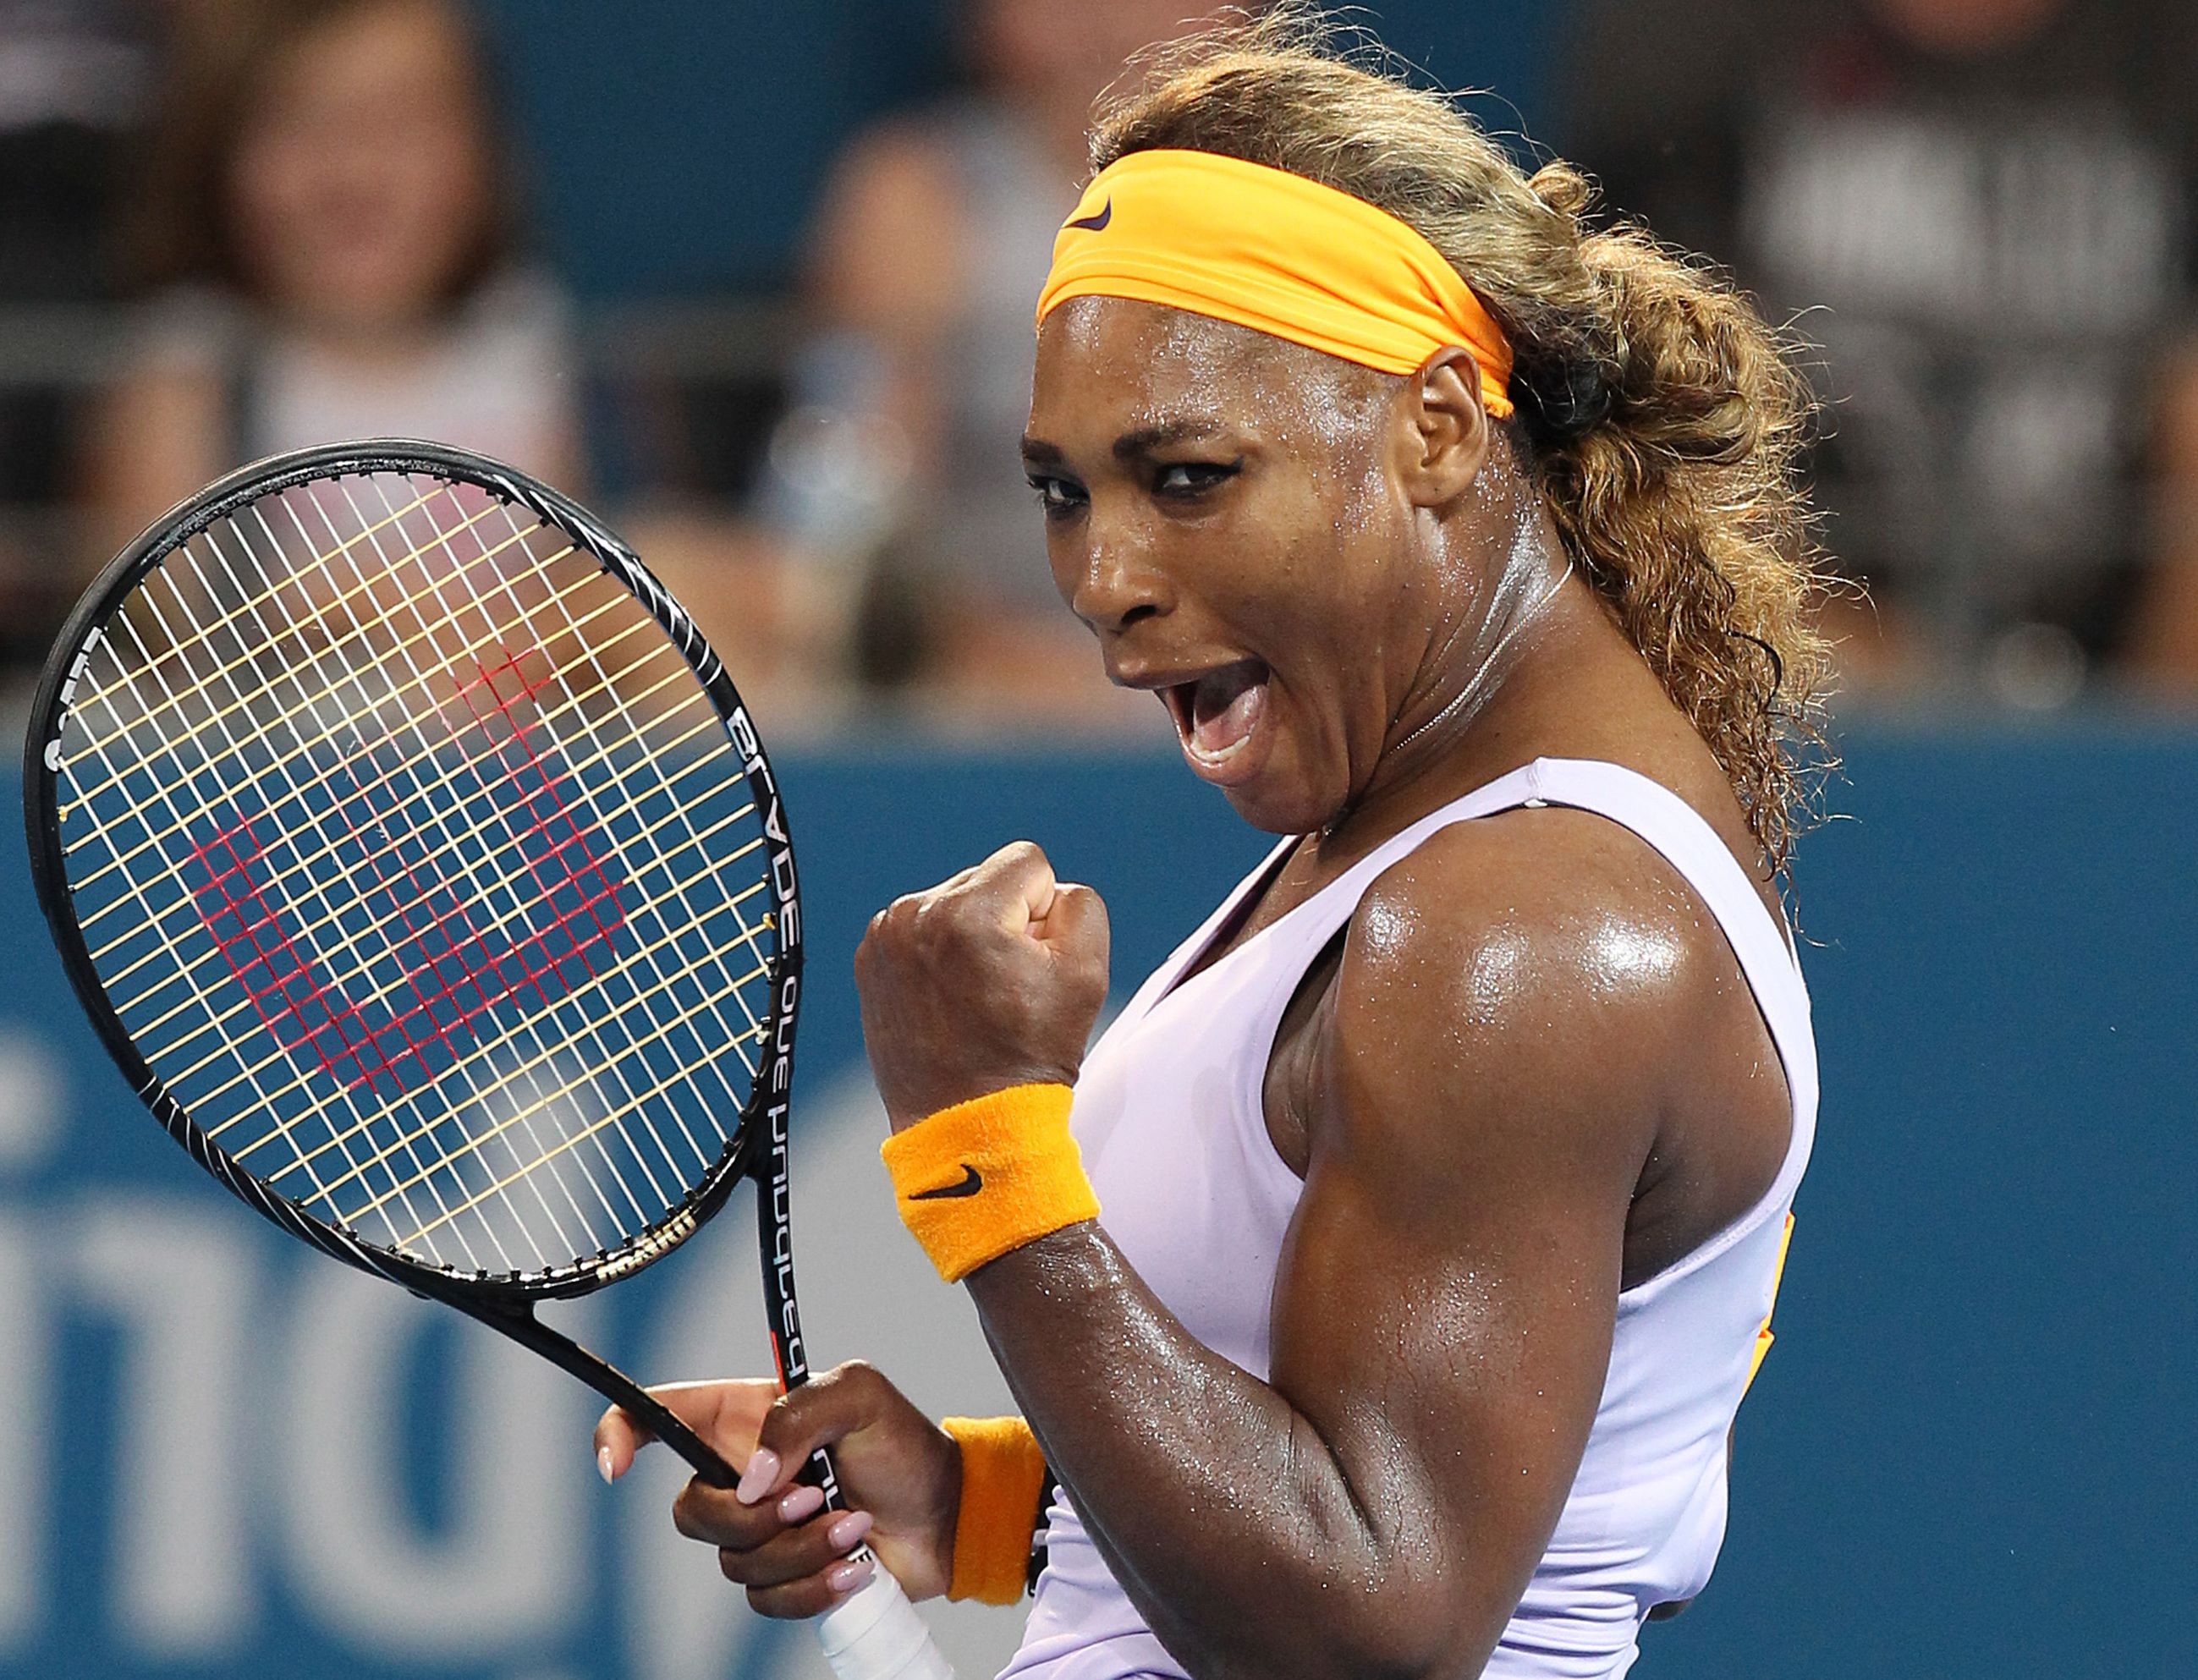 Serena Williams: The career of a tennis icon | Tennis News | Sky Sports